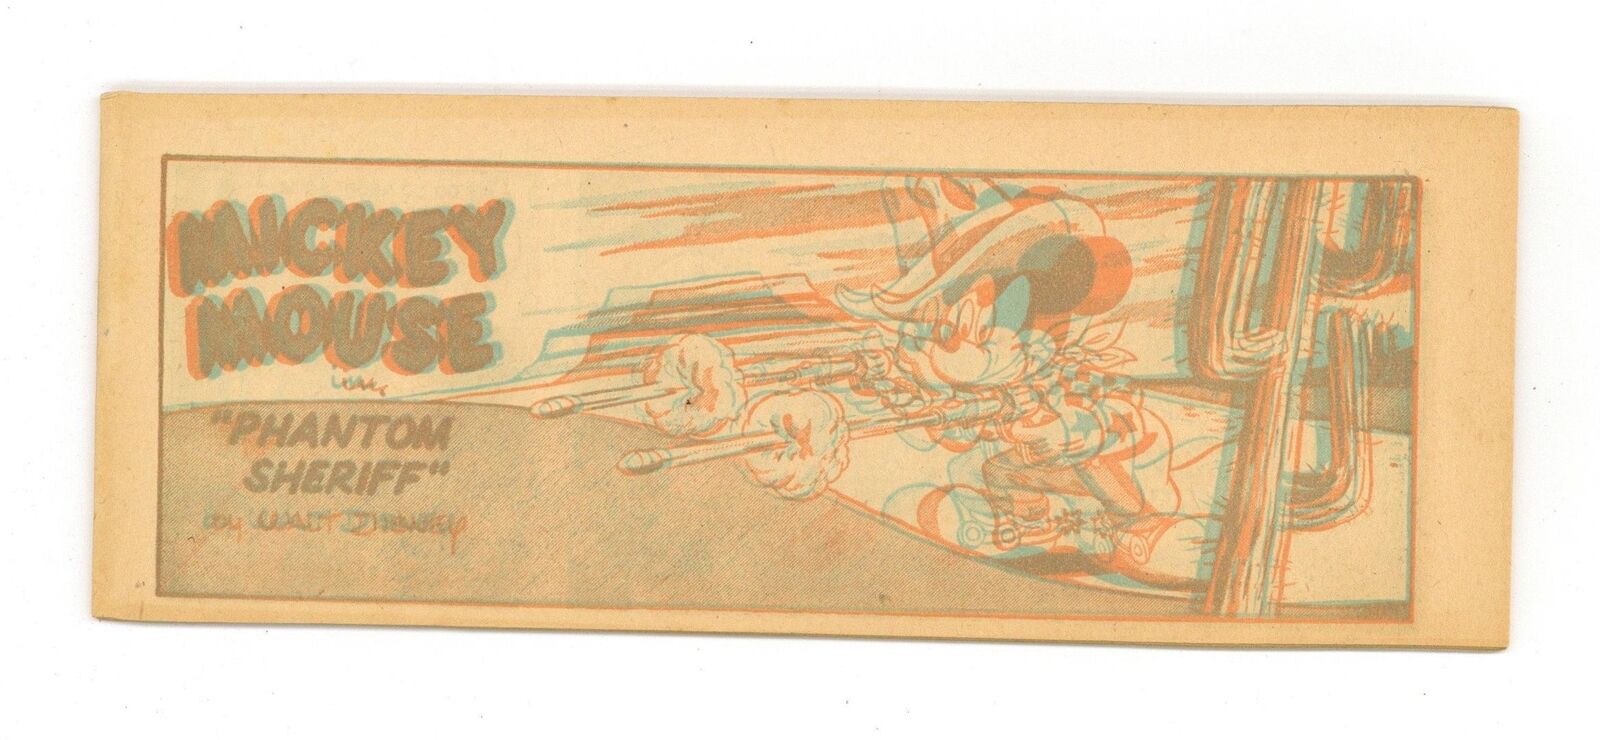 Mickey Mouse in Phantom Sheriff 3-D #0 FN+ 6.5 1954